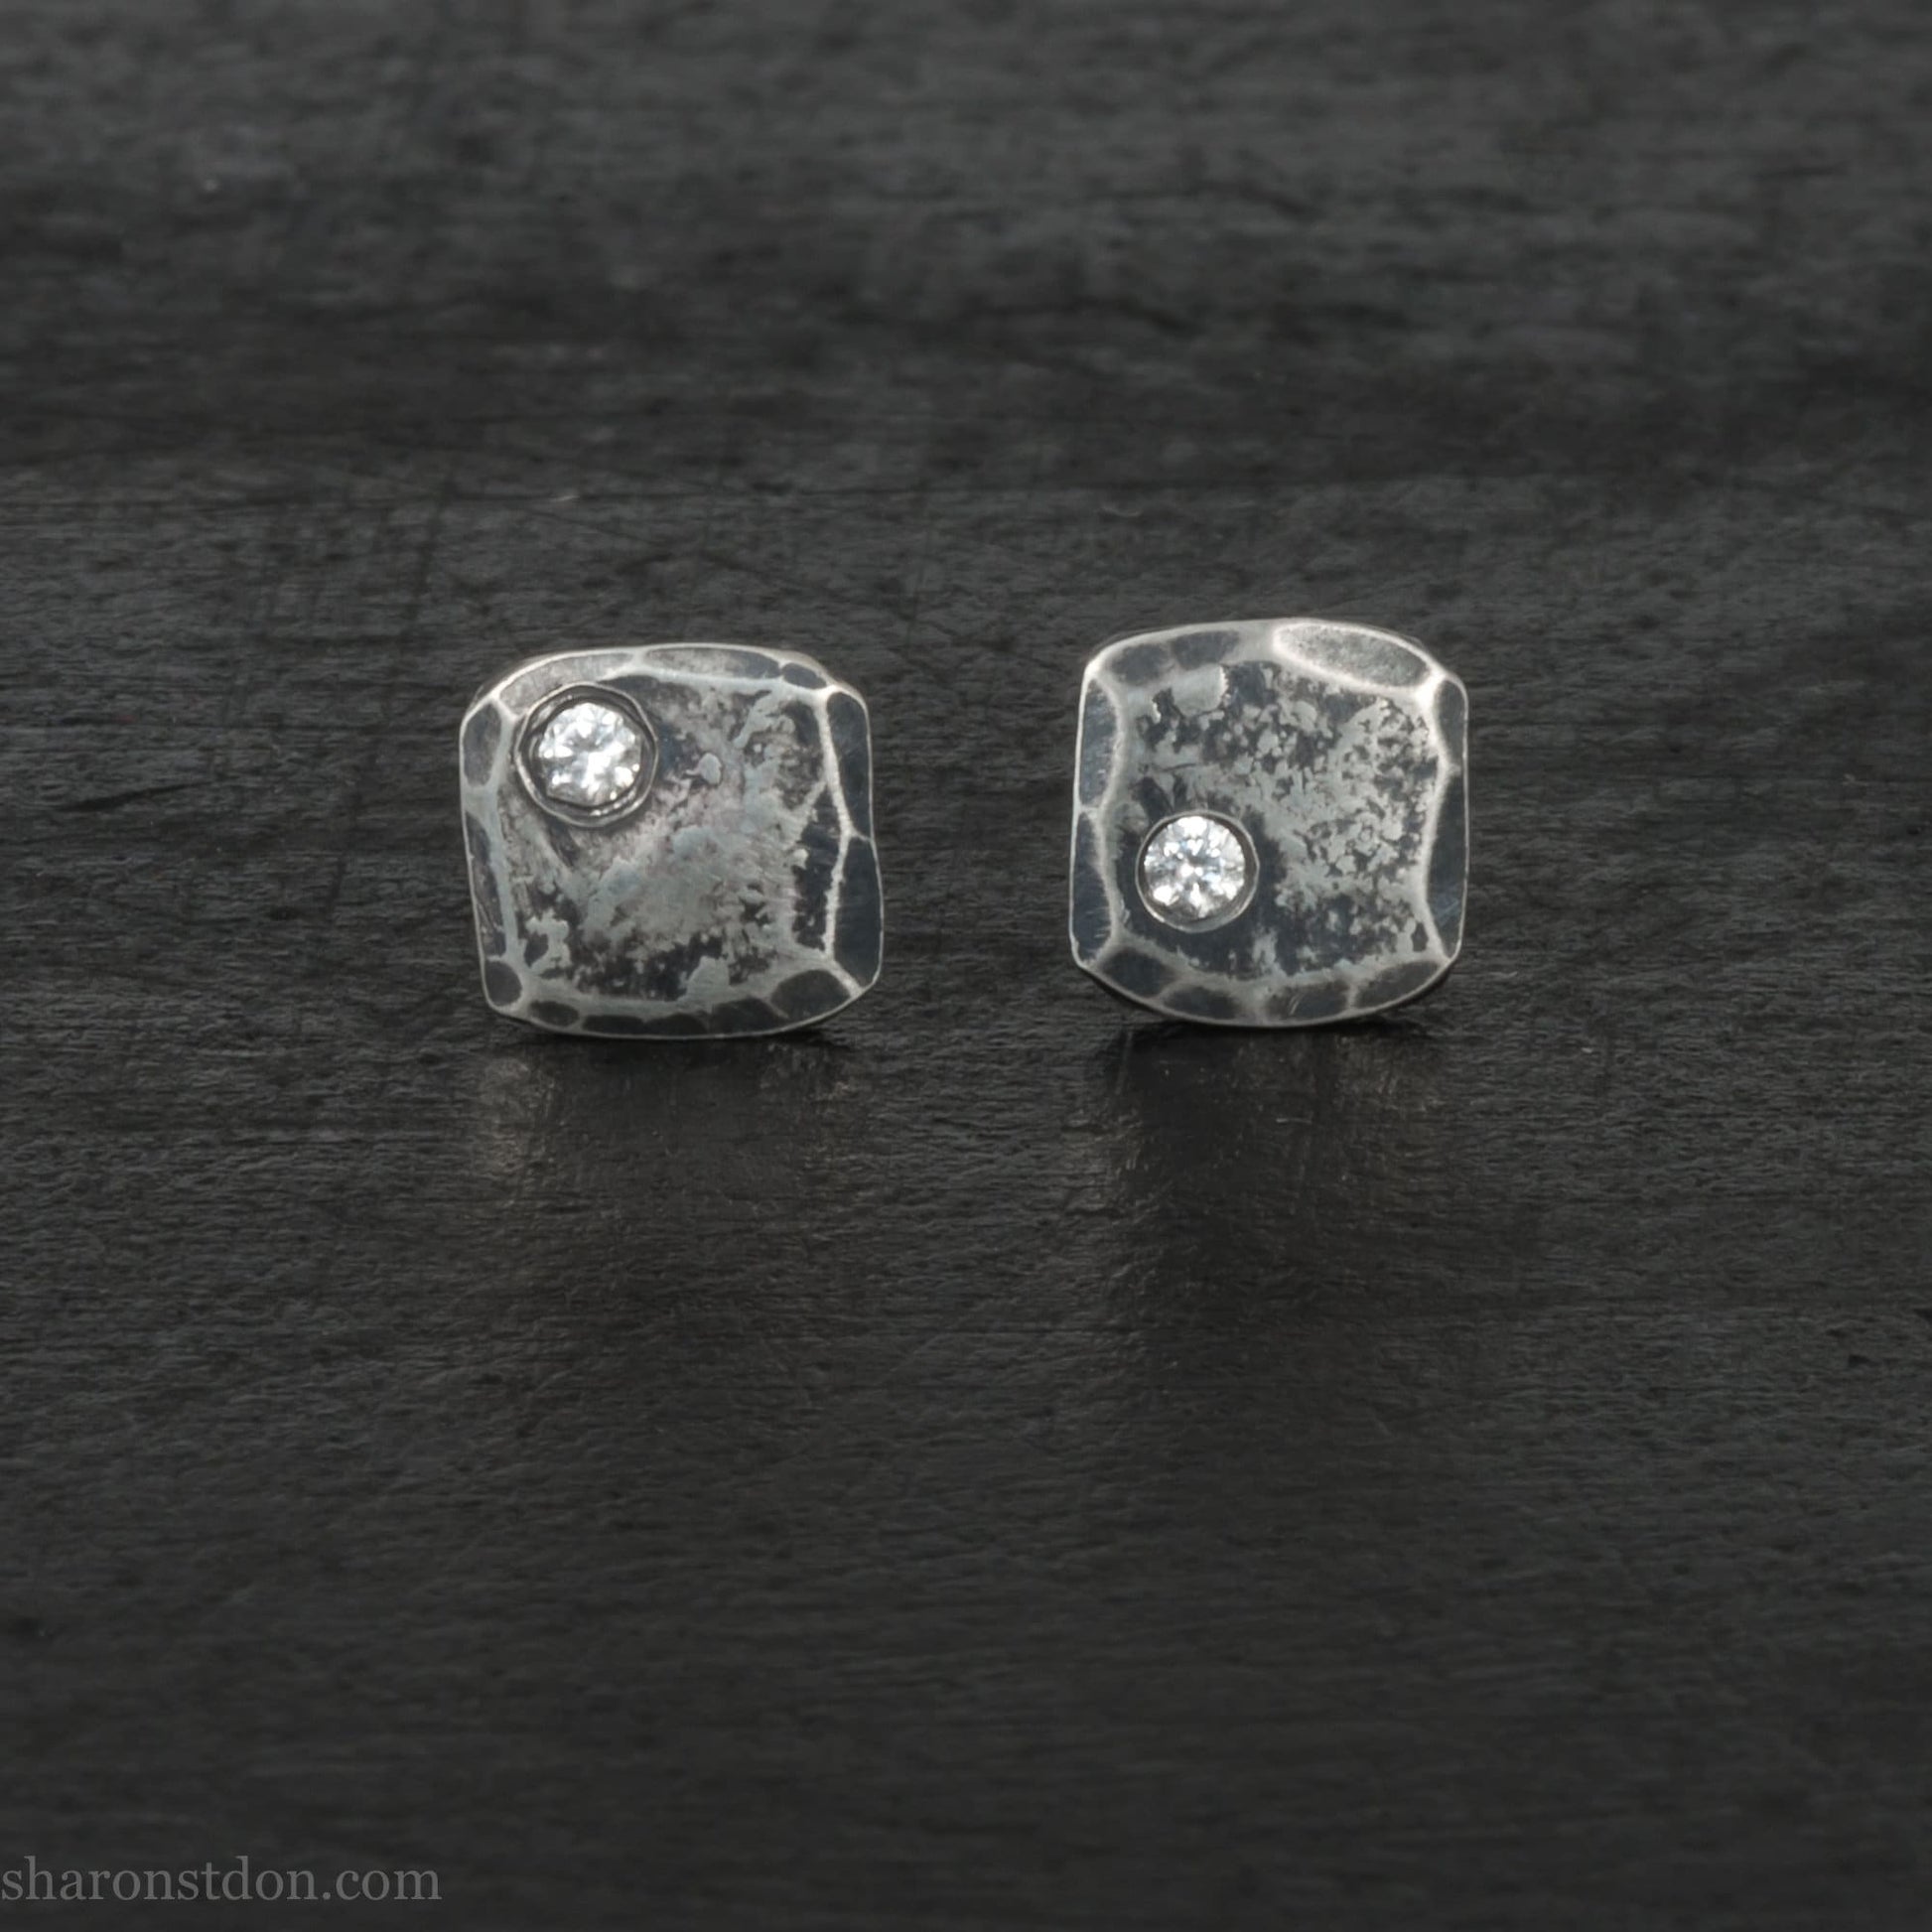 Handmade 925 sterling silver stud earrings with imitation diamond gemstones. Daily wear small square stud earrings made by Sharon SaintDon in North America.